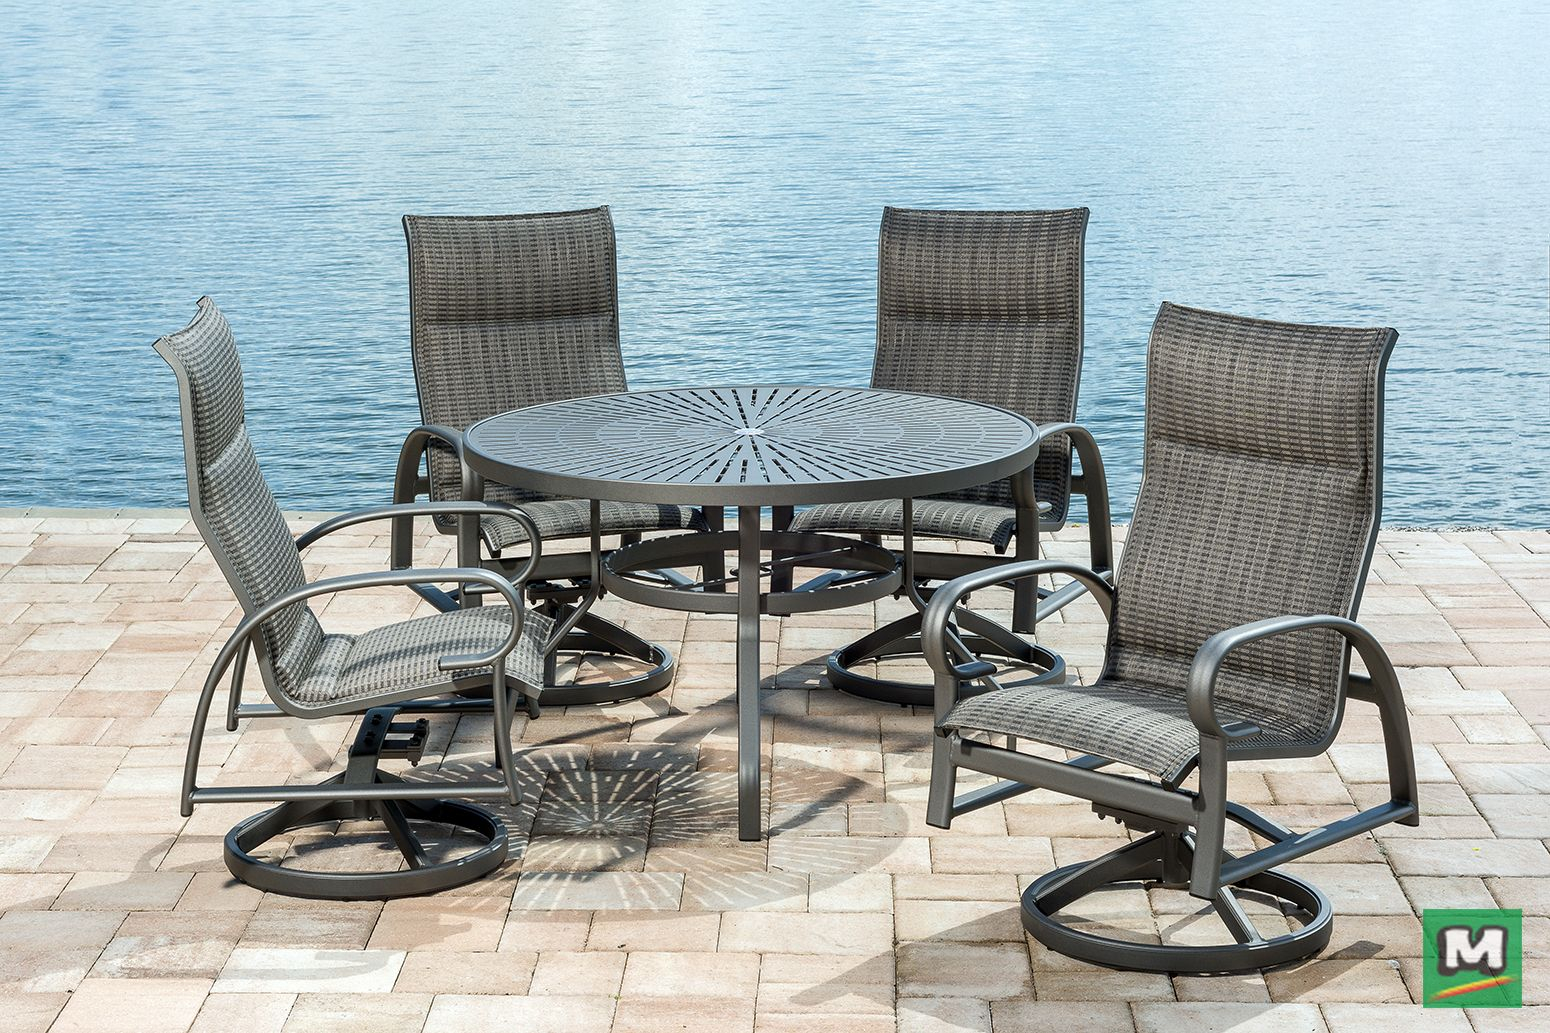 This Backyard Creations 5 Piece Legacy Dining Collection regarding dimensions 1550 X 1033